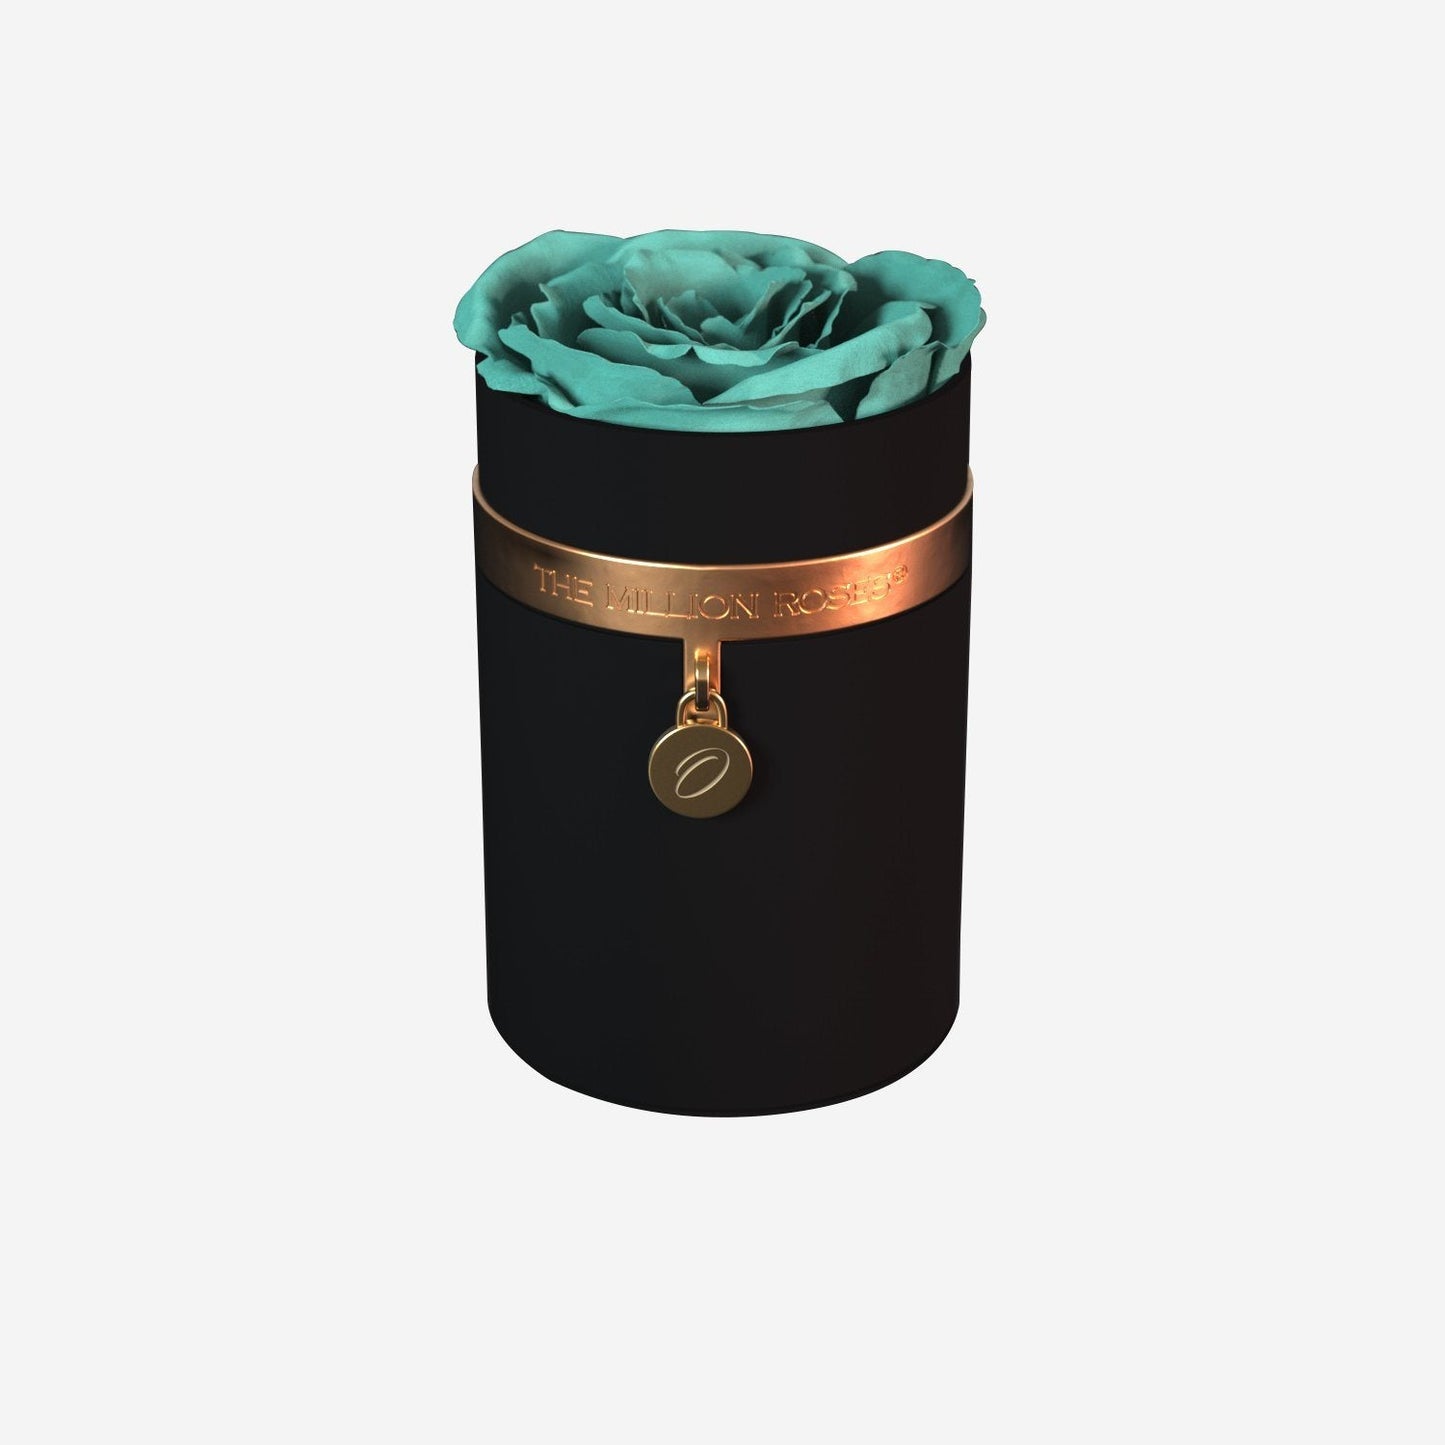 One in a Million™ Round Black Box | Charm Edition | Turquoise Rose - The Million Roses